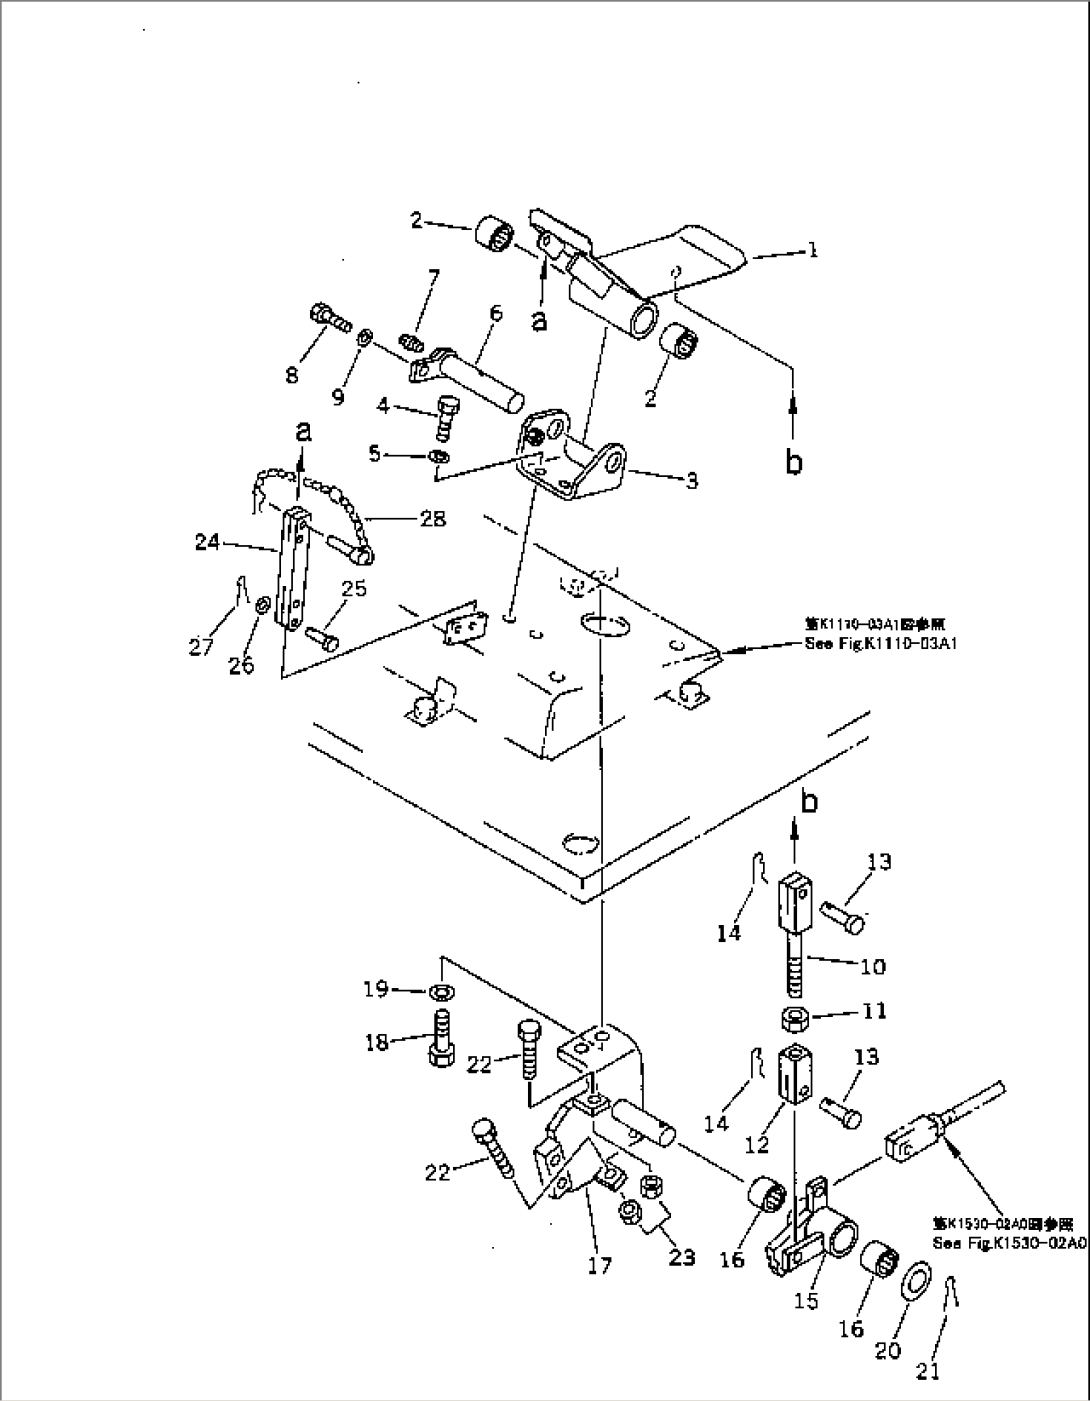 CONTROL PEDAL AND LINKAGE (FOR ADDITIONAL PIPING) (FOR WRIST CONTROL)